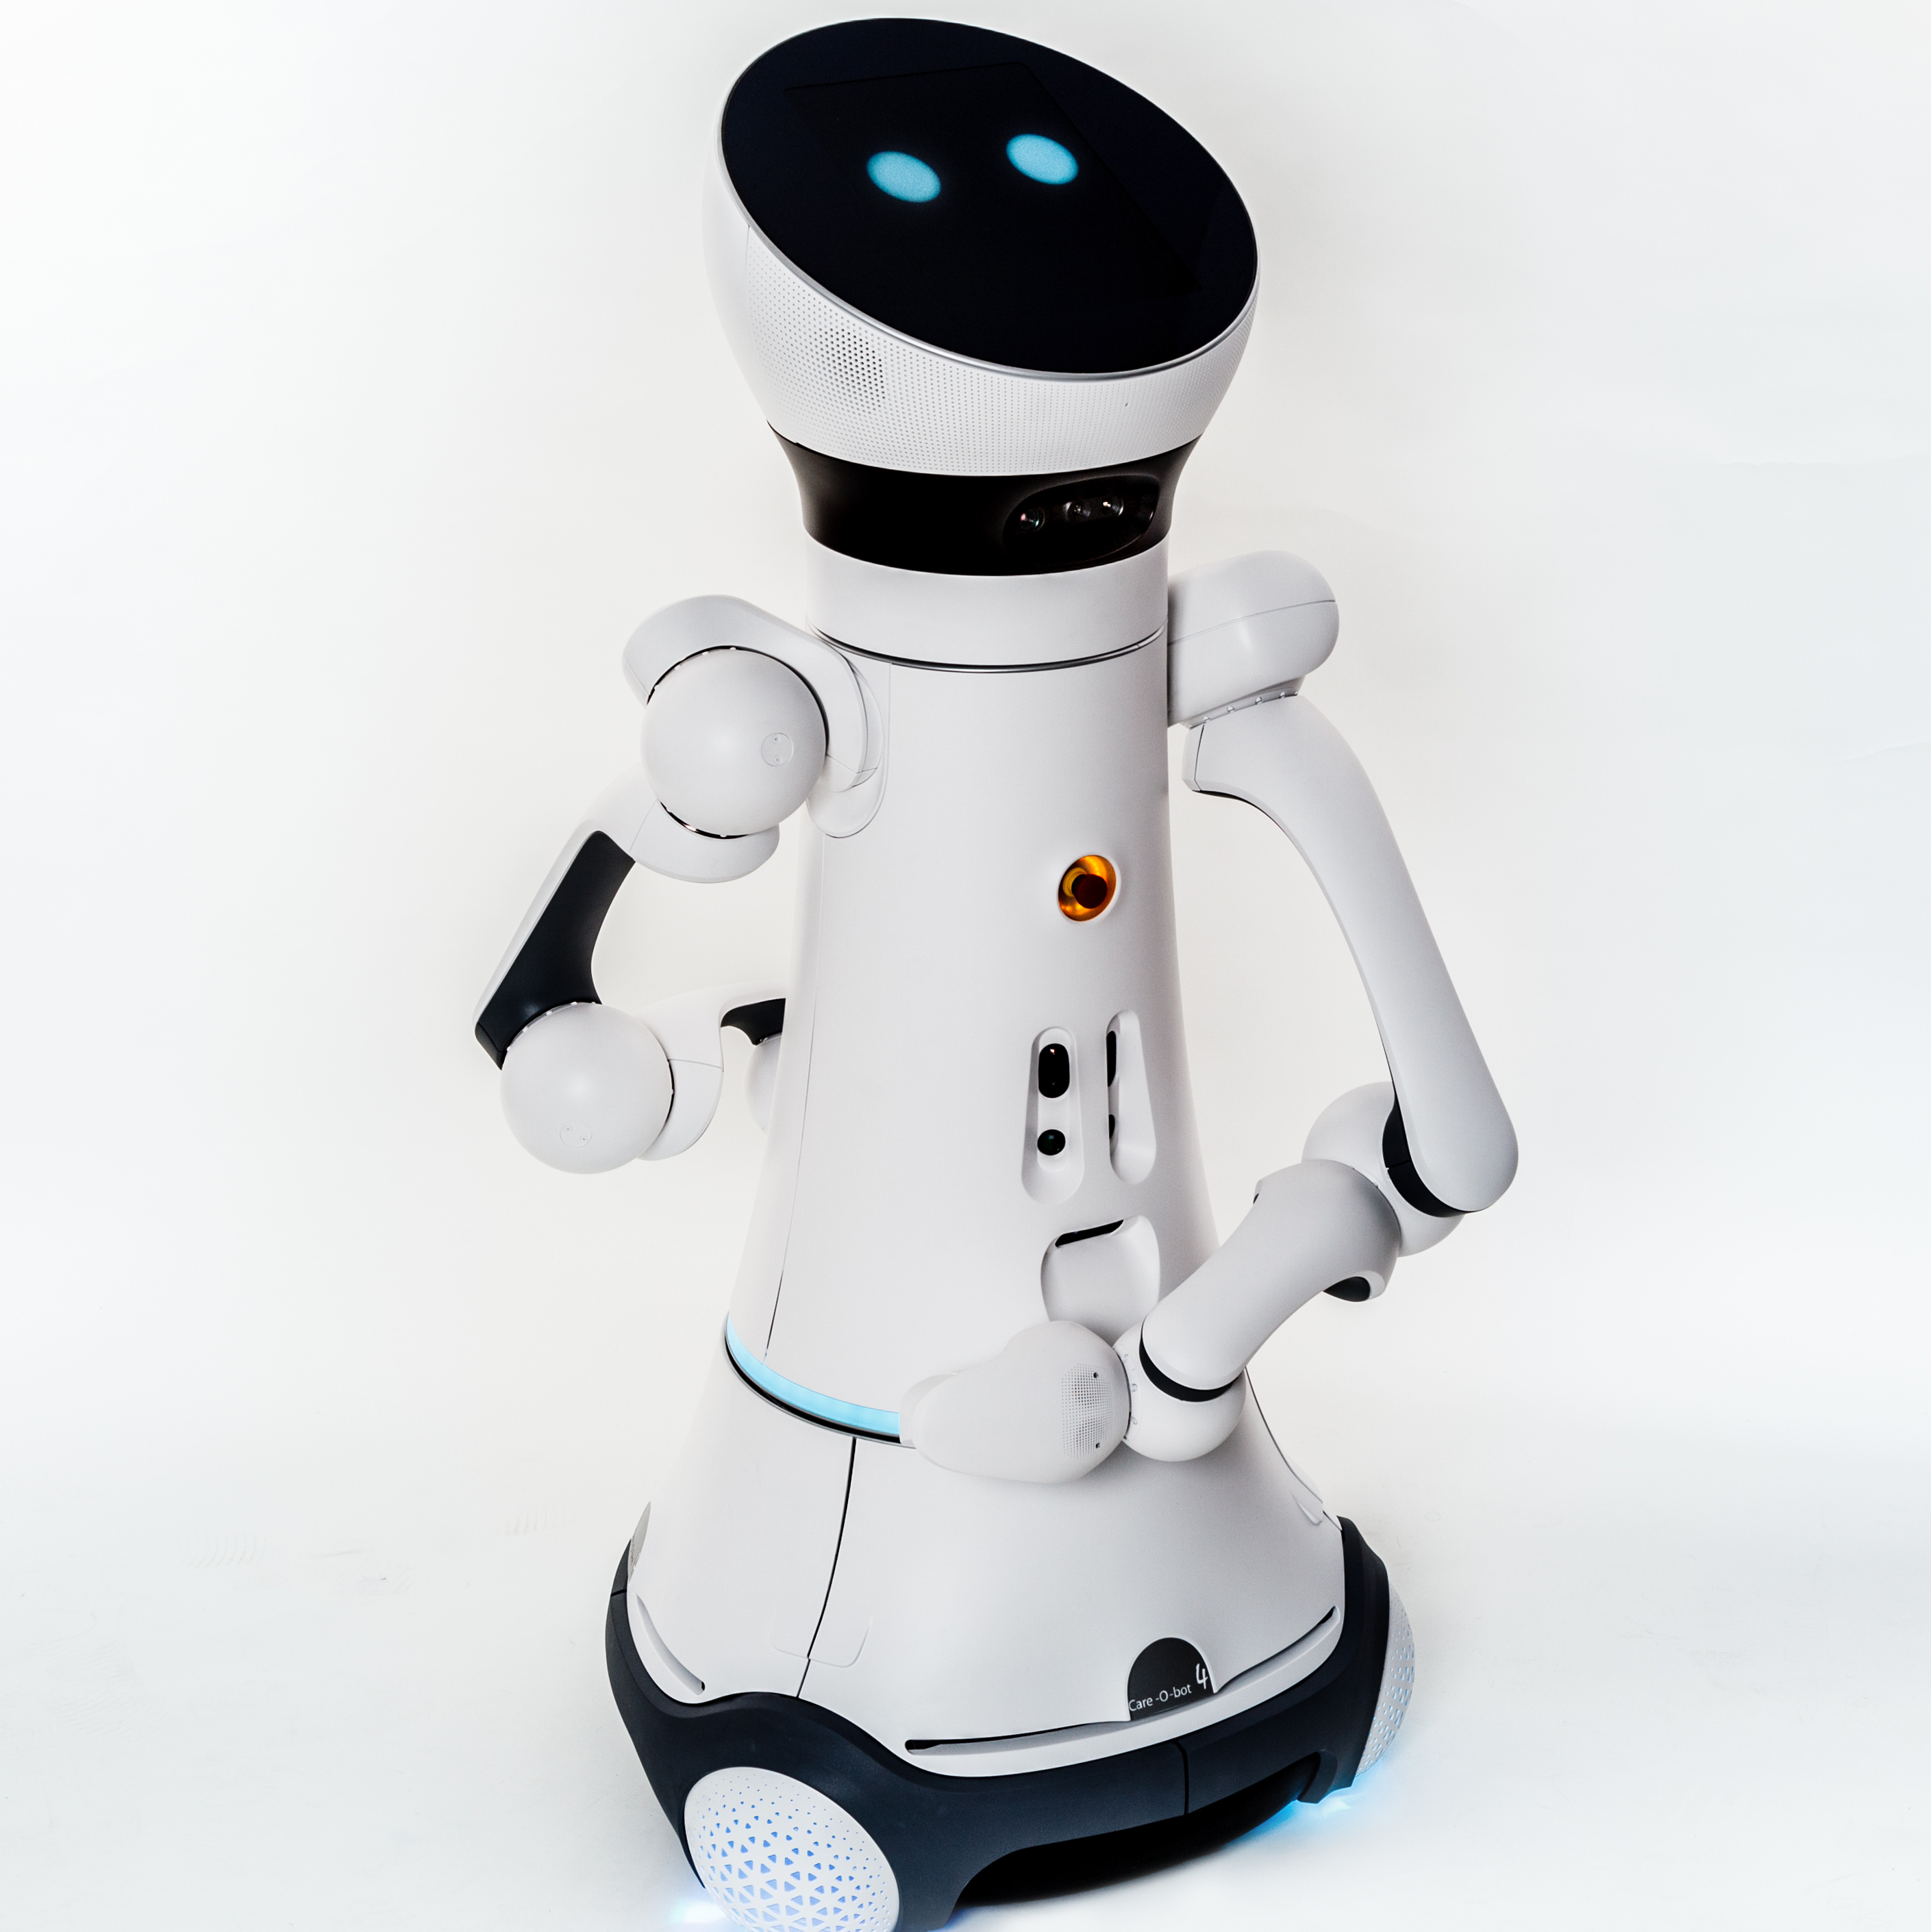 Robots with care treatment in nursing homes hospitals - Healthcare industry